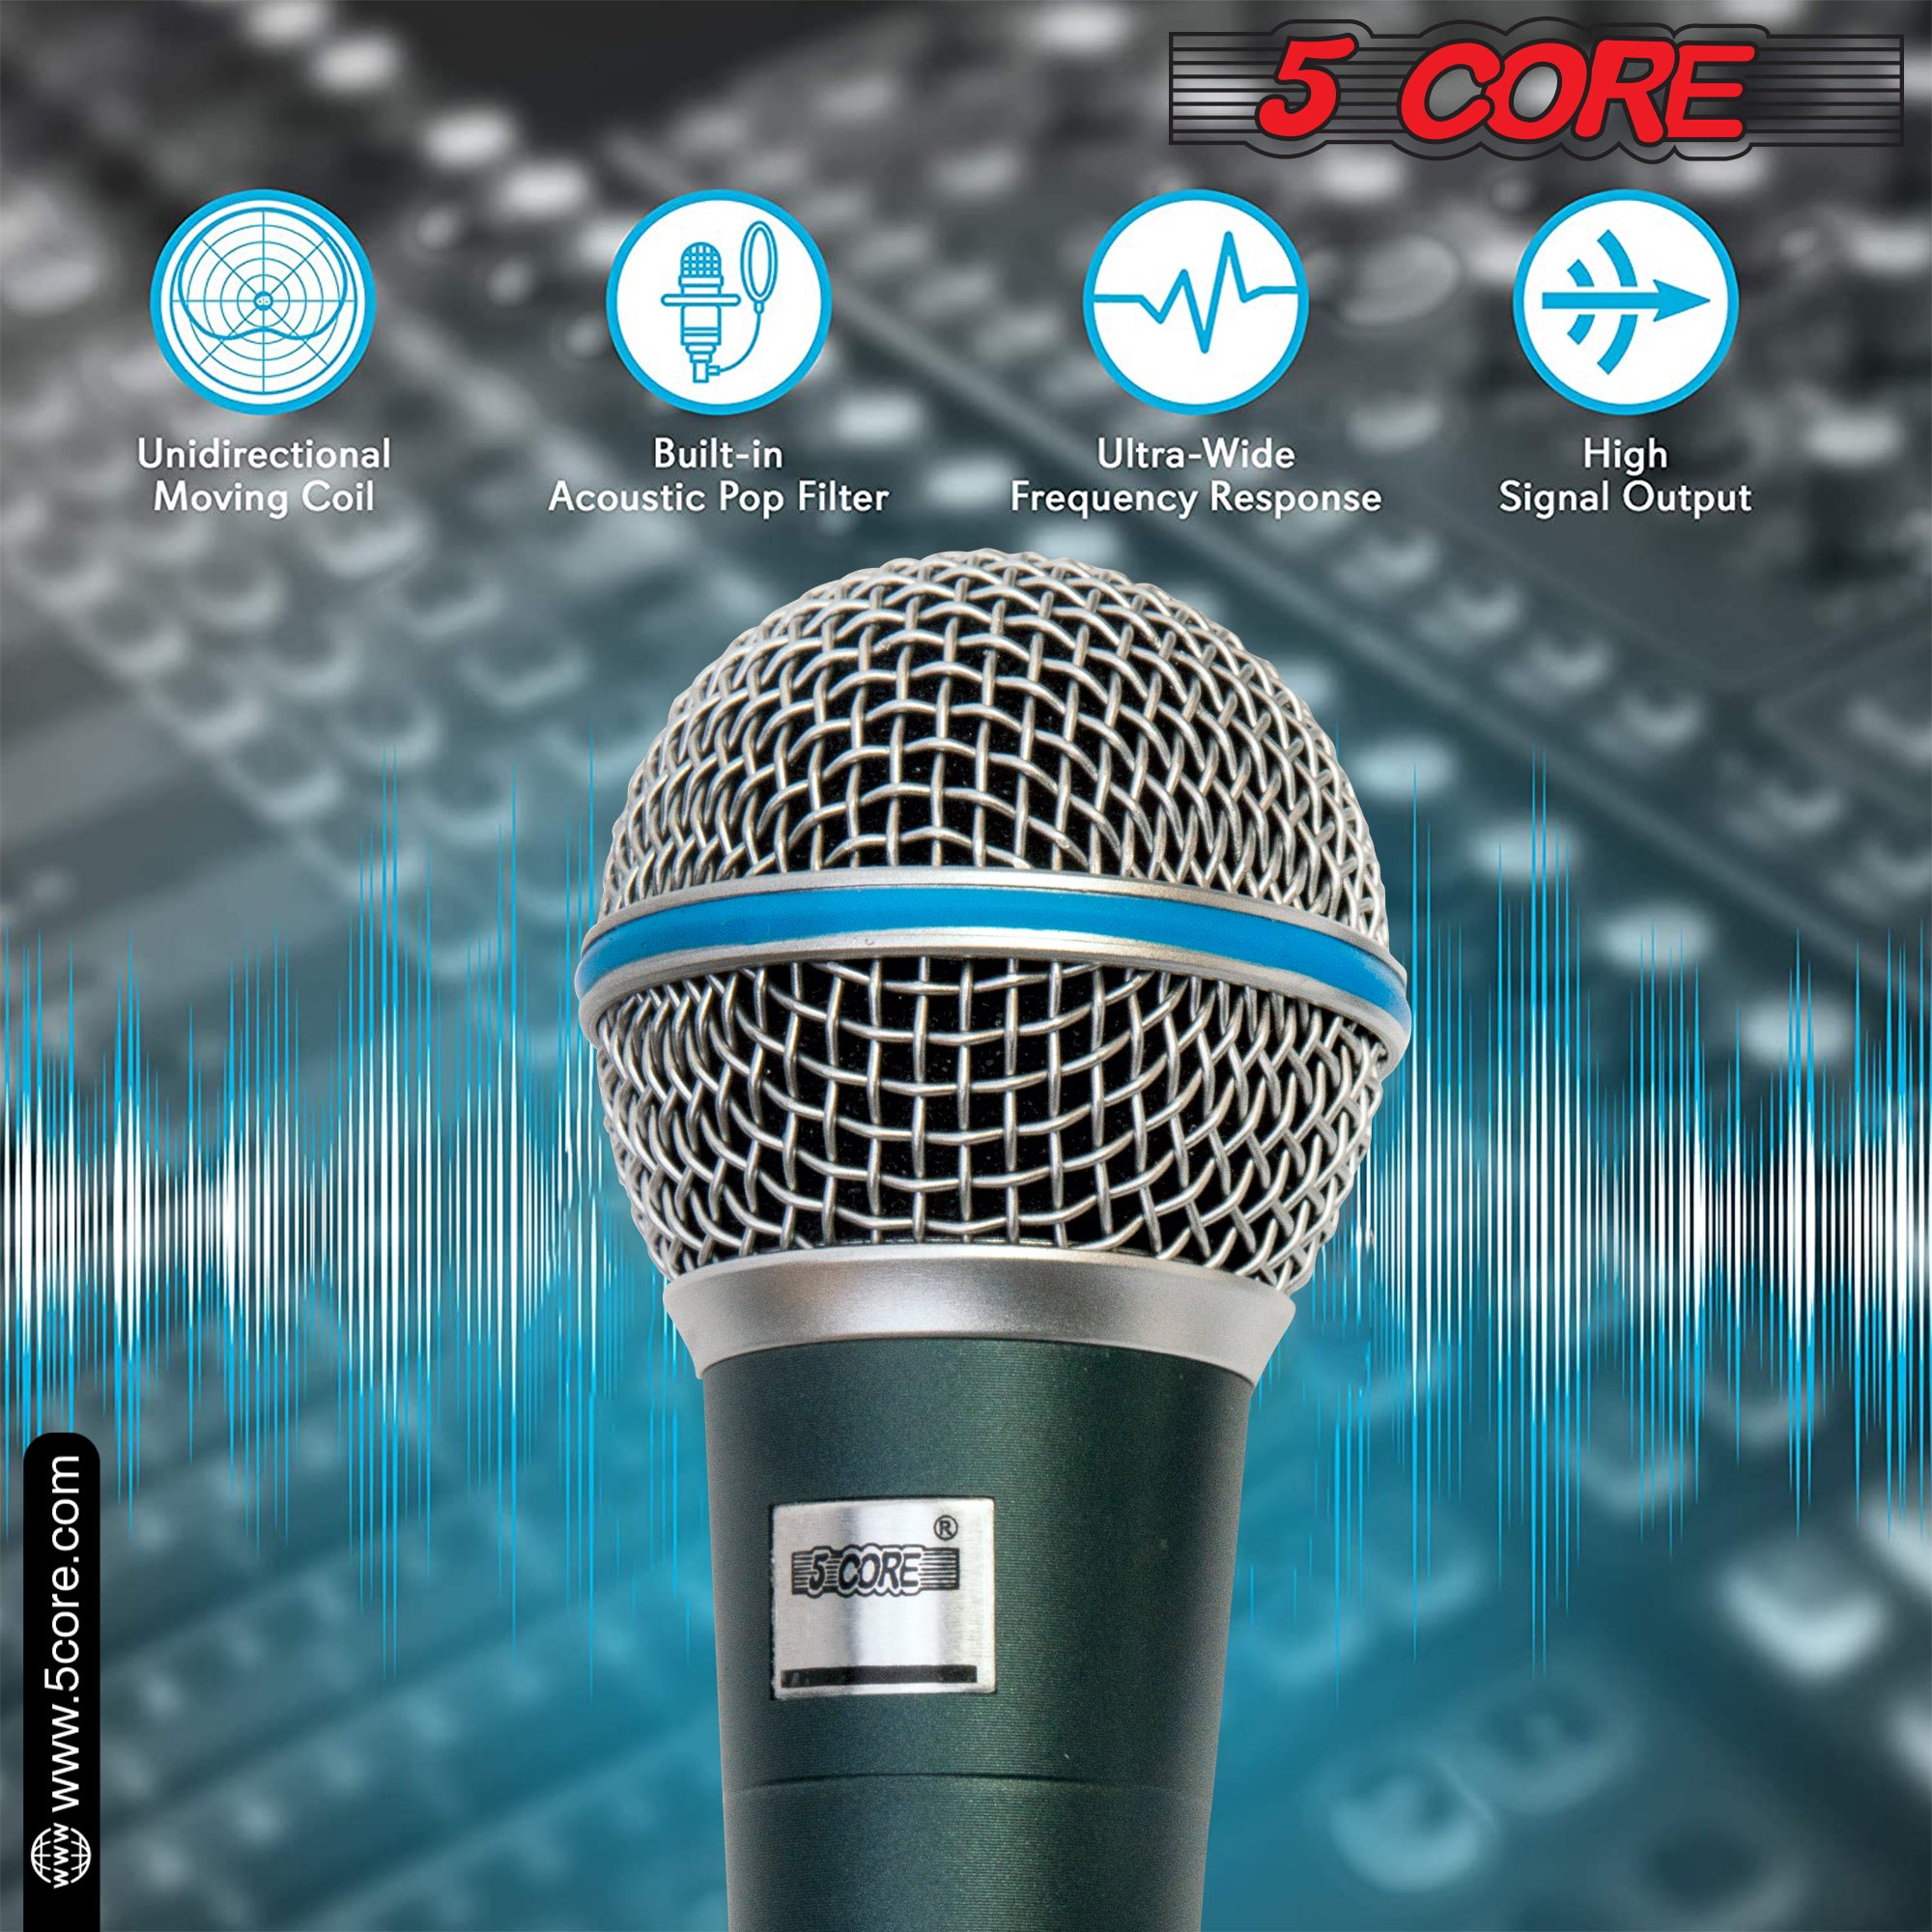 Professional Grade Clarity: Unidirectional Cardioid Microphone